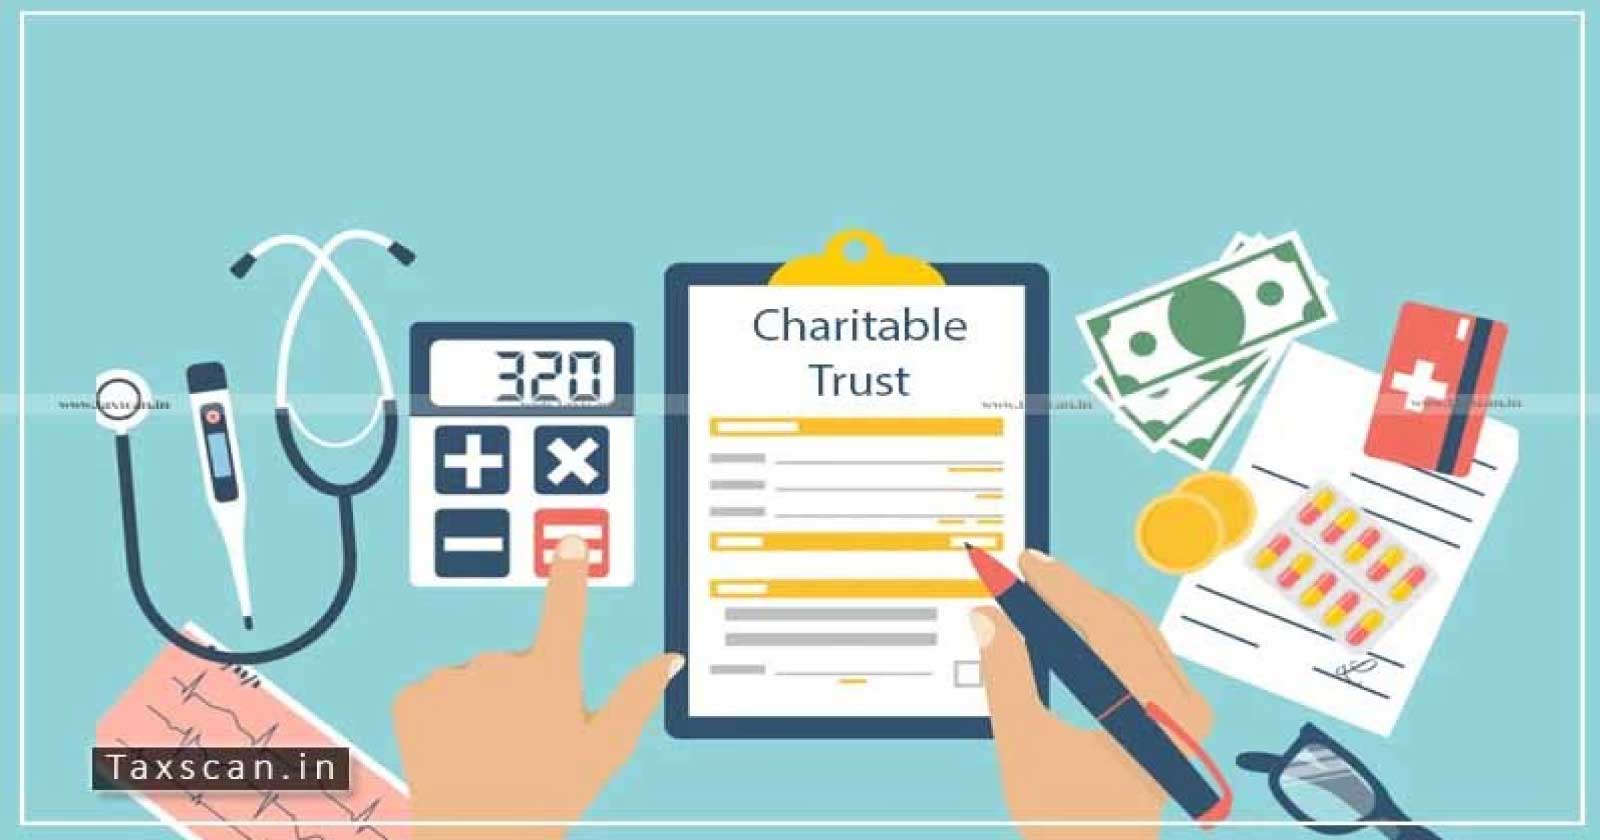 Cancellation of Registration of Charitable Trust - Cancellation of Registration - Charitable Trust - Income Tax Act - PCIT - Jurisdiction is Invalid - taxscan